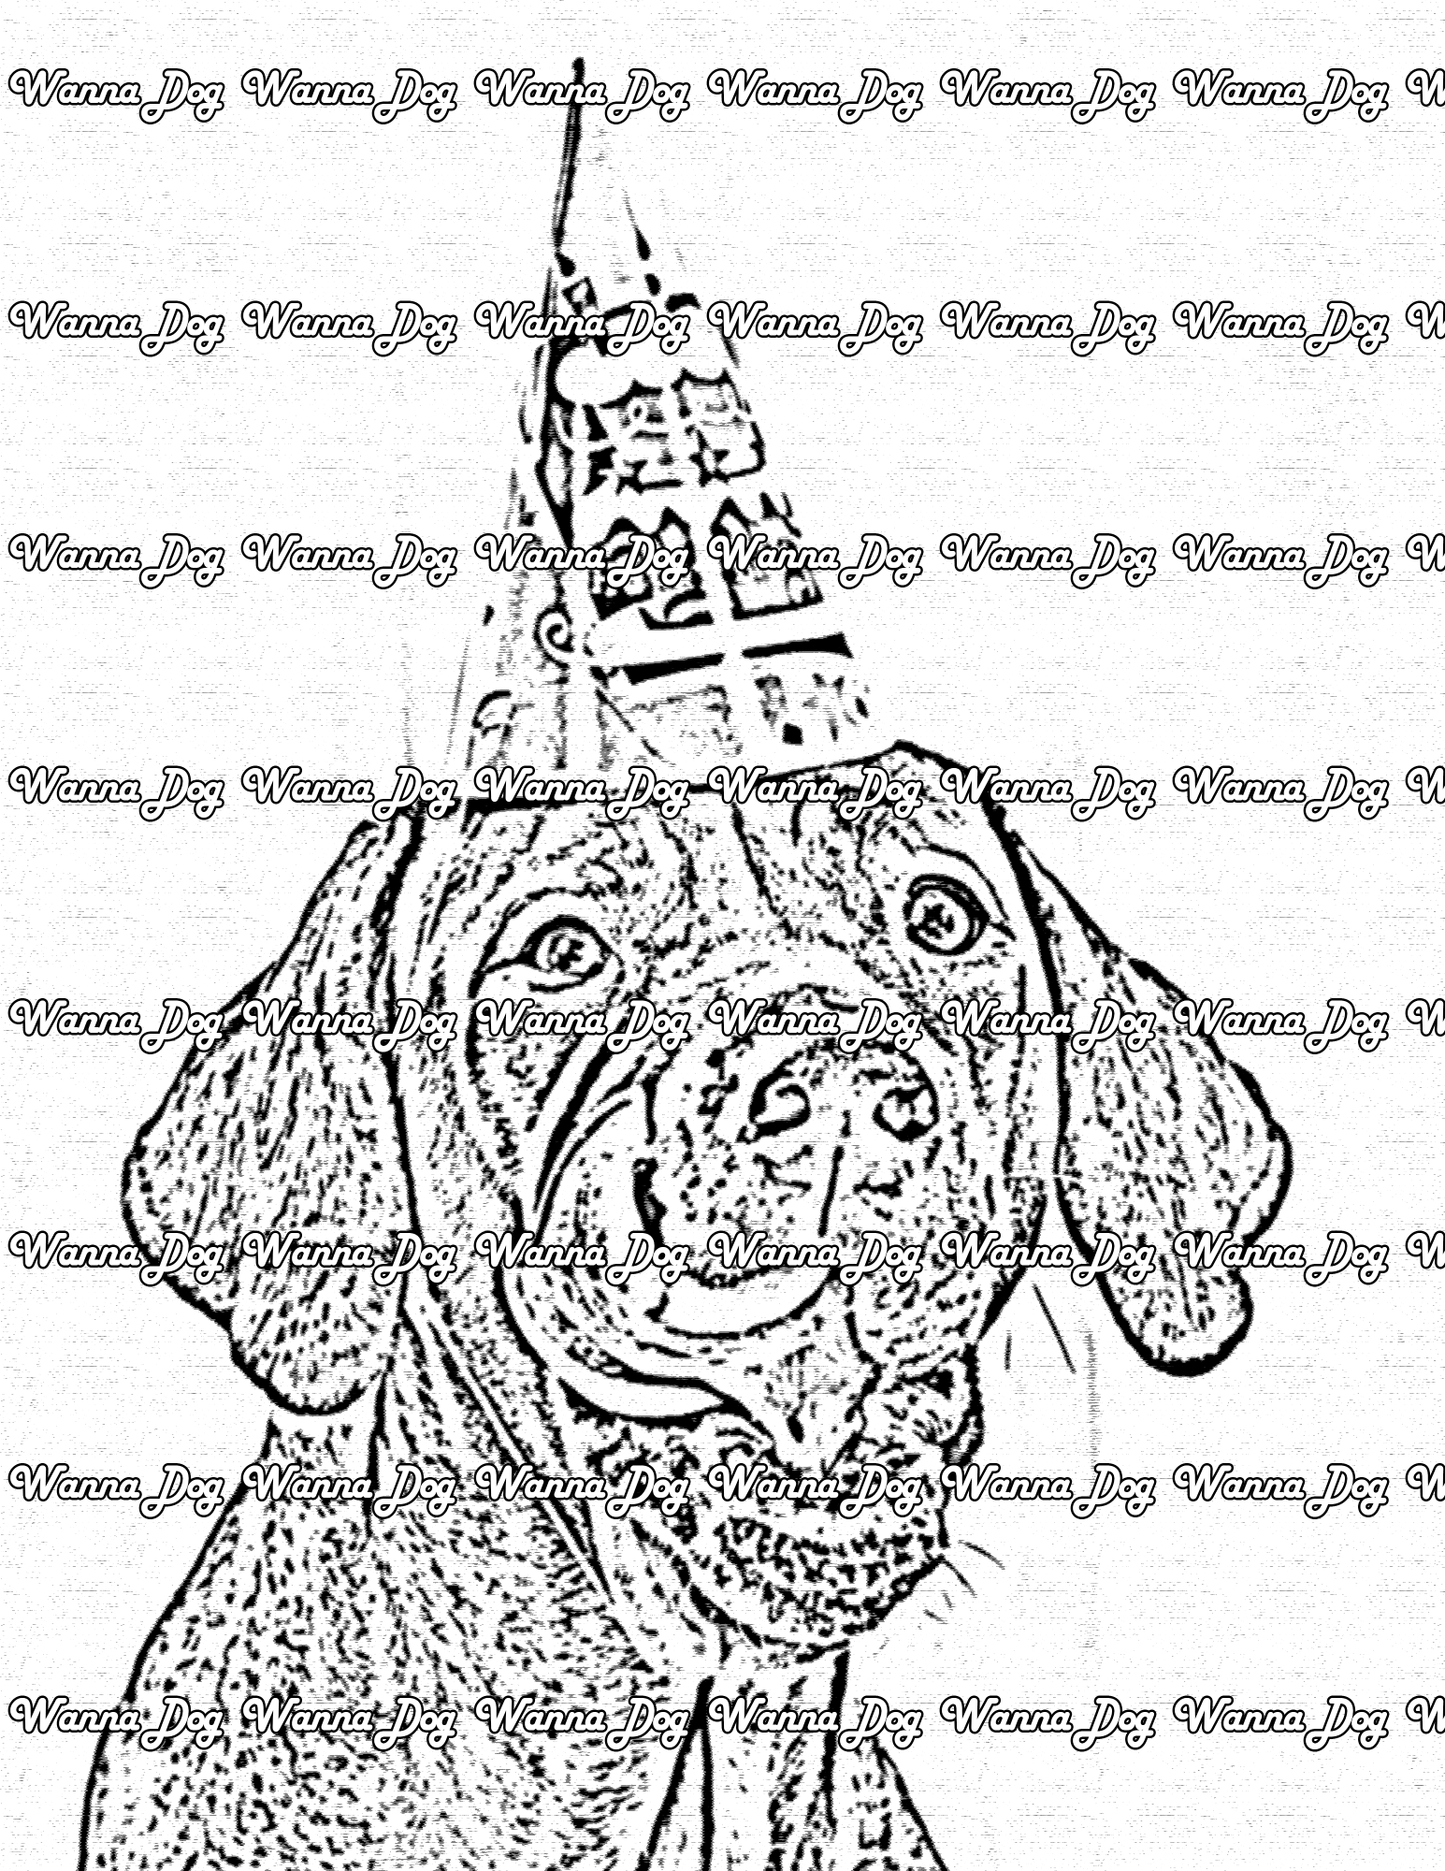 Dachshund Coloring Page of a Dachshund with a birthday hat